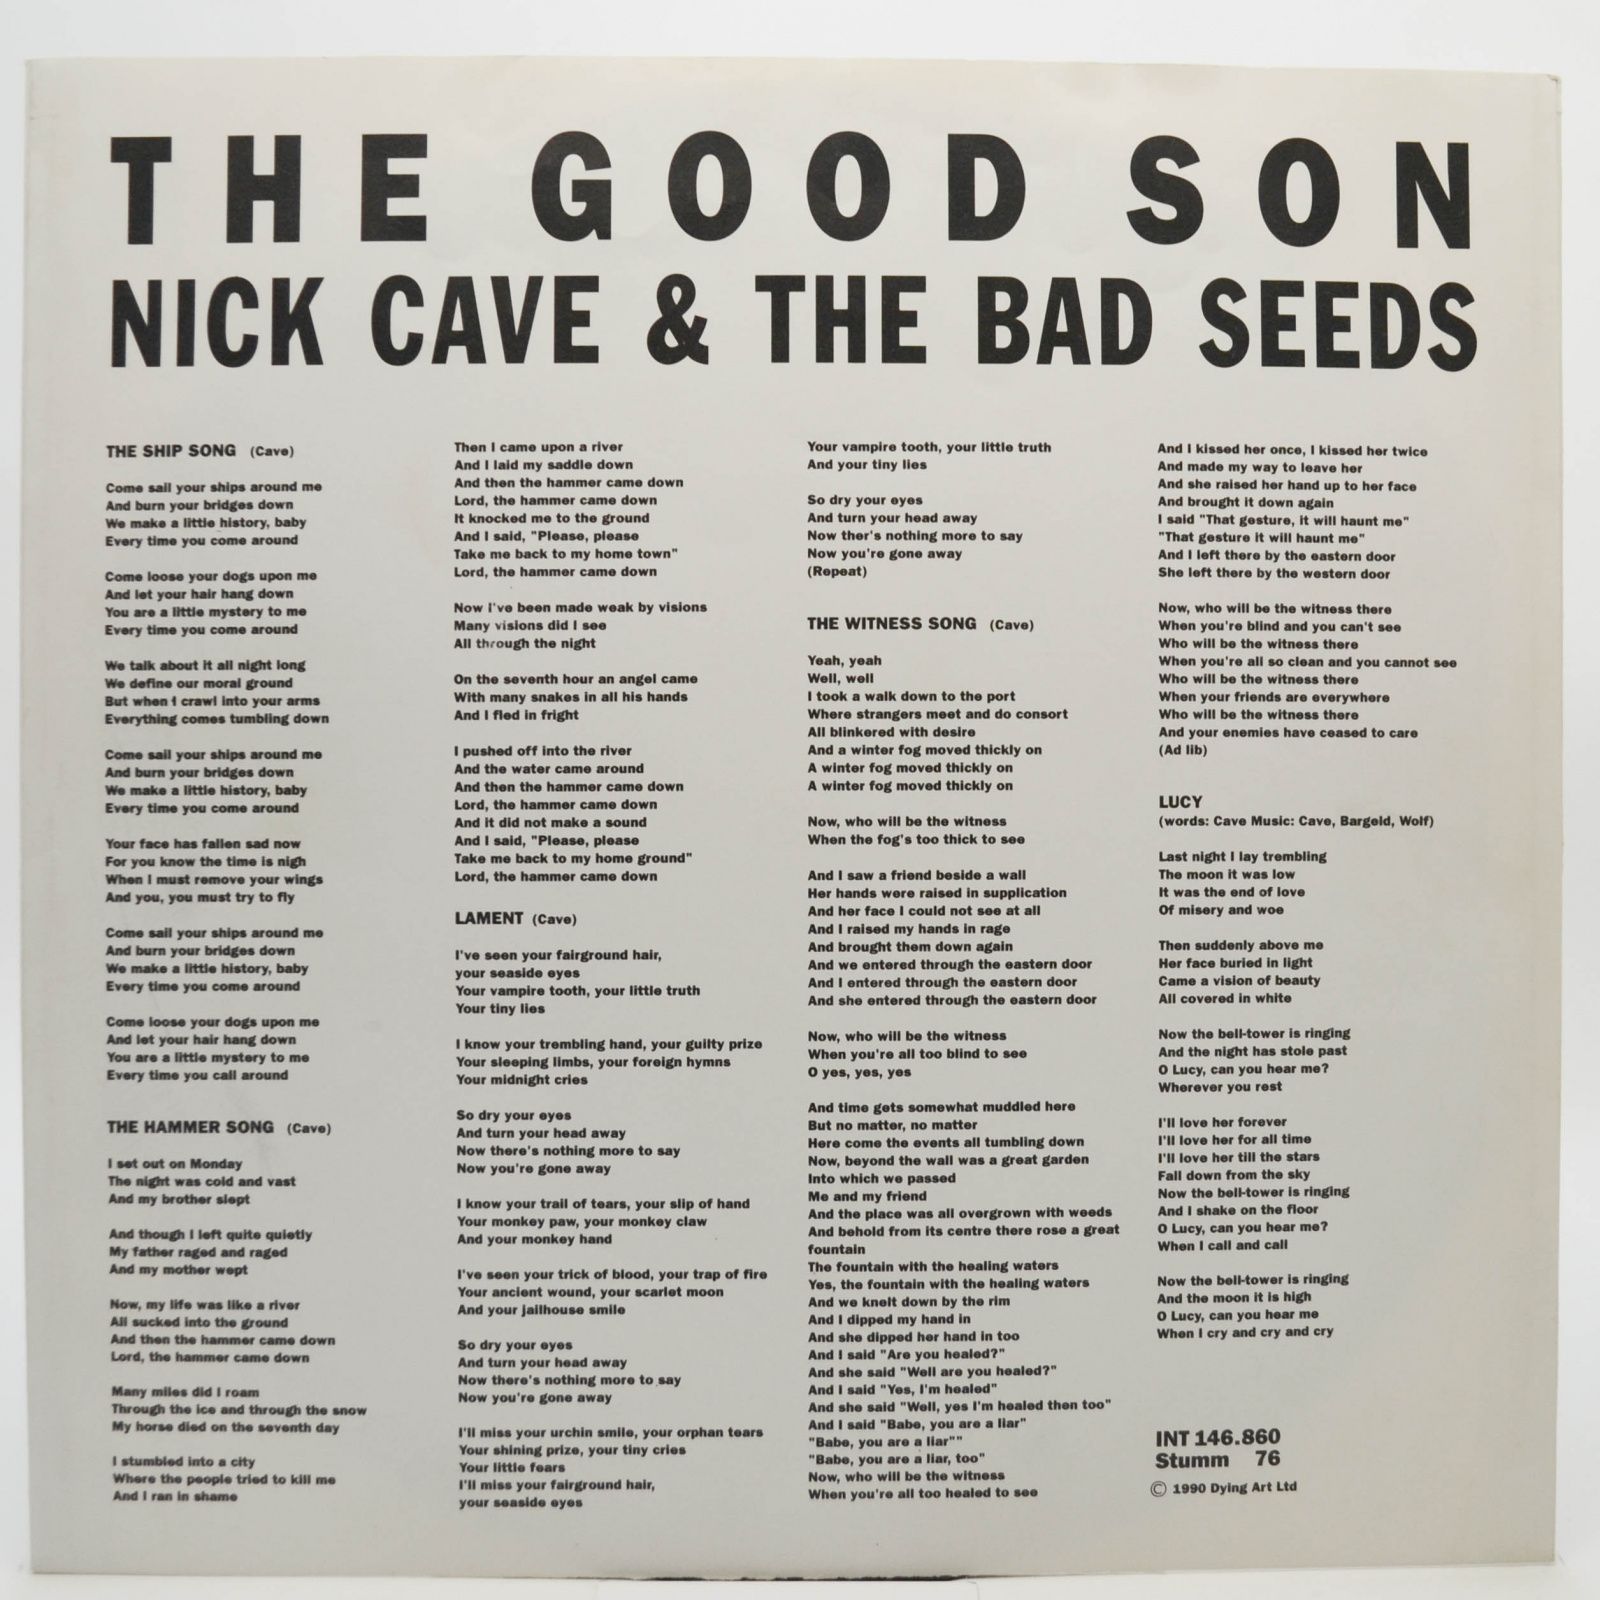 Nick Cave & The Bad Seeds — The Good Son, 1990